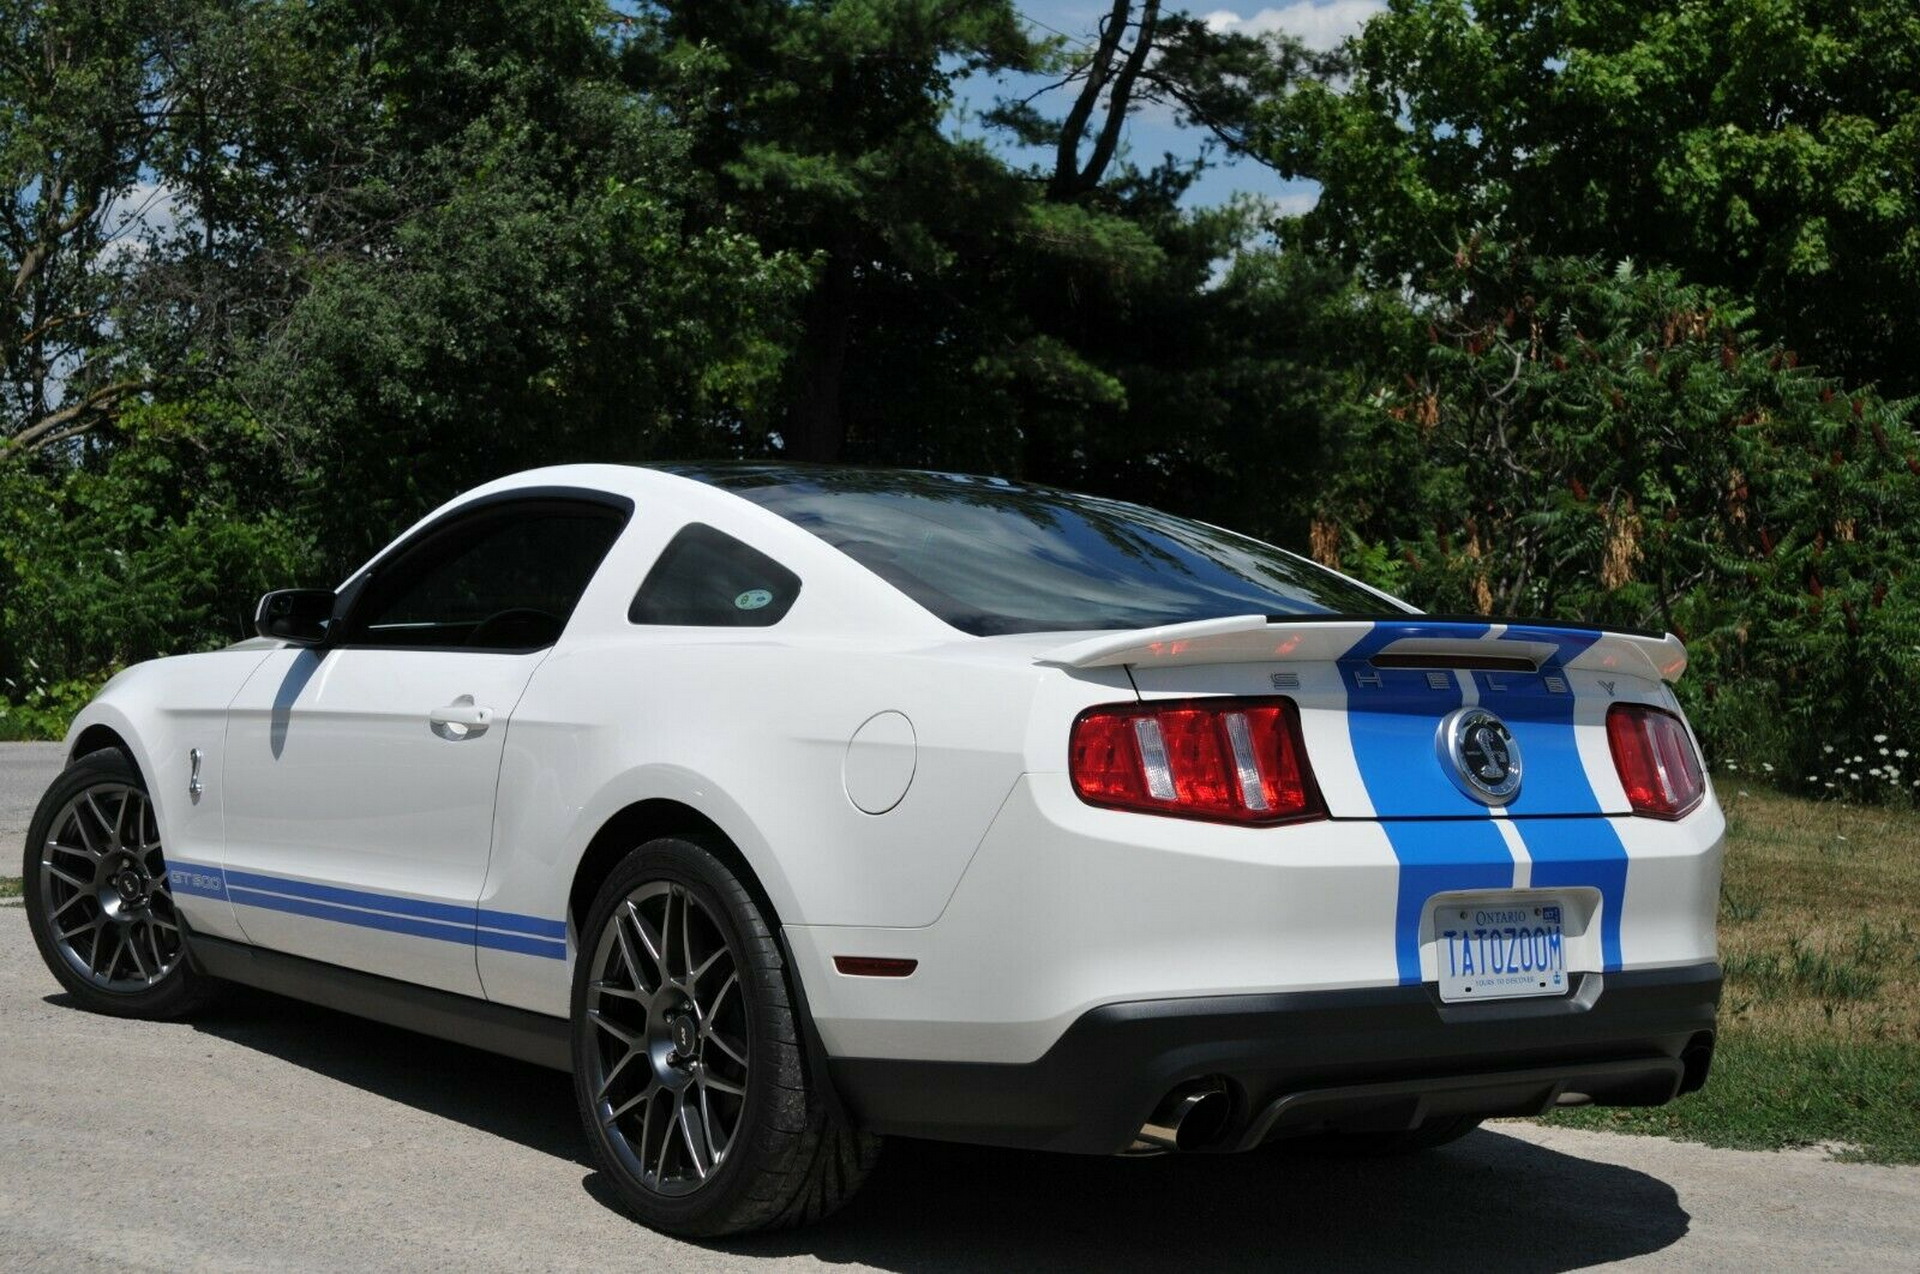 Buy This ‘one Of Two 2011 Shelby Gt500 Tribute Prototype For The Price